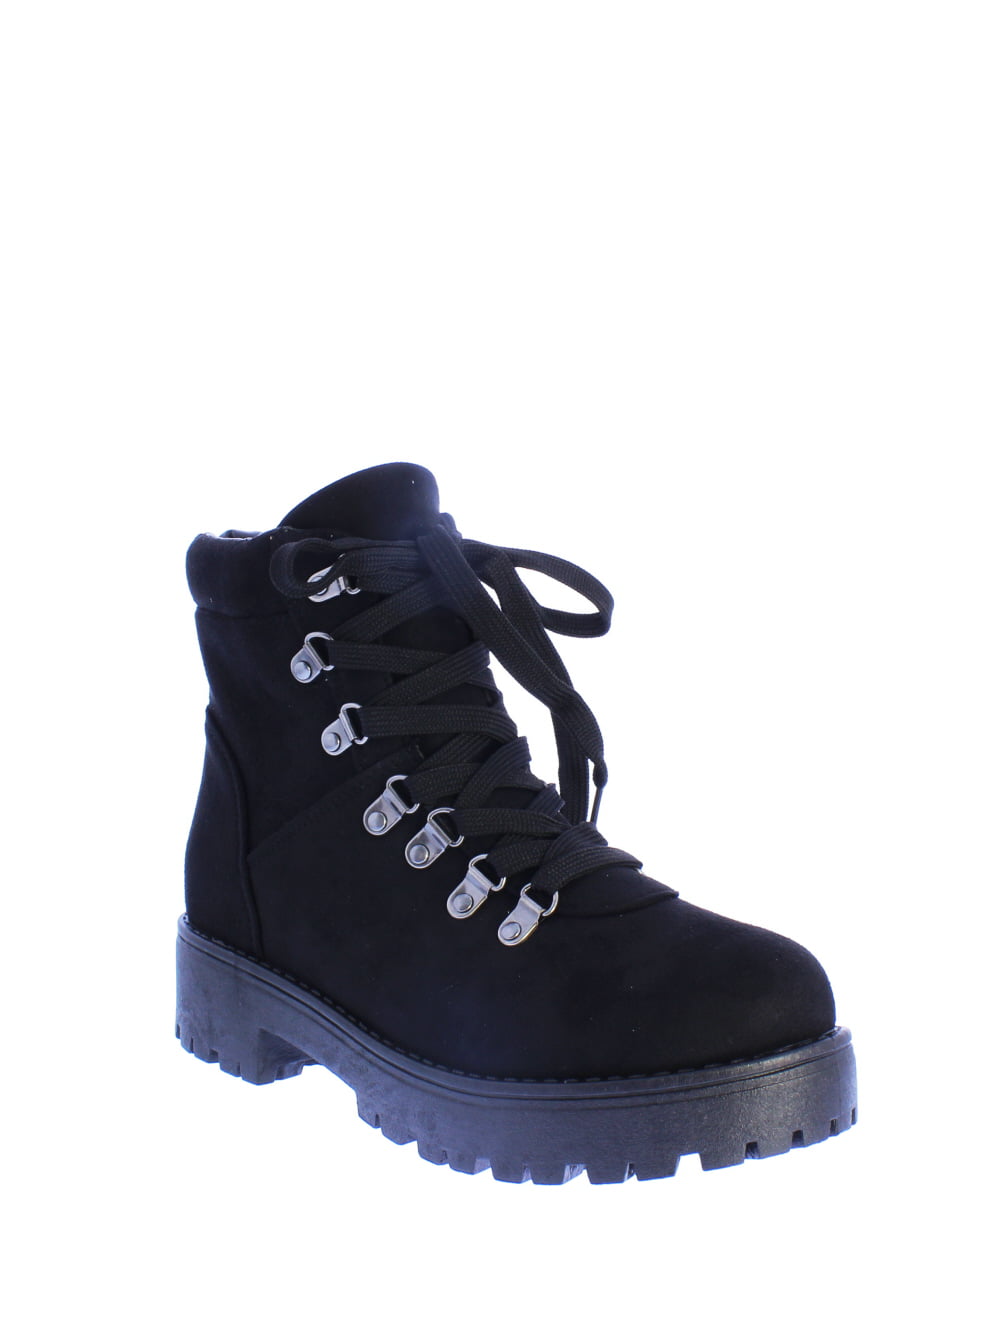 Bamboo Women Casual Lace Up Boot in Black Suede - Walmart.com